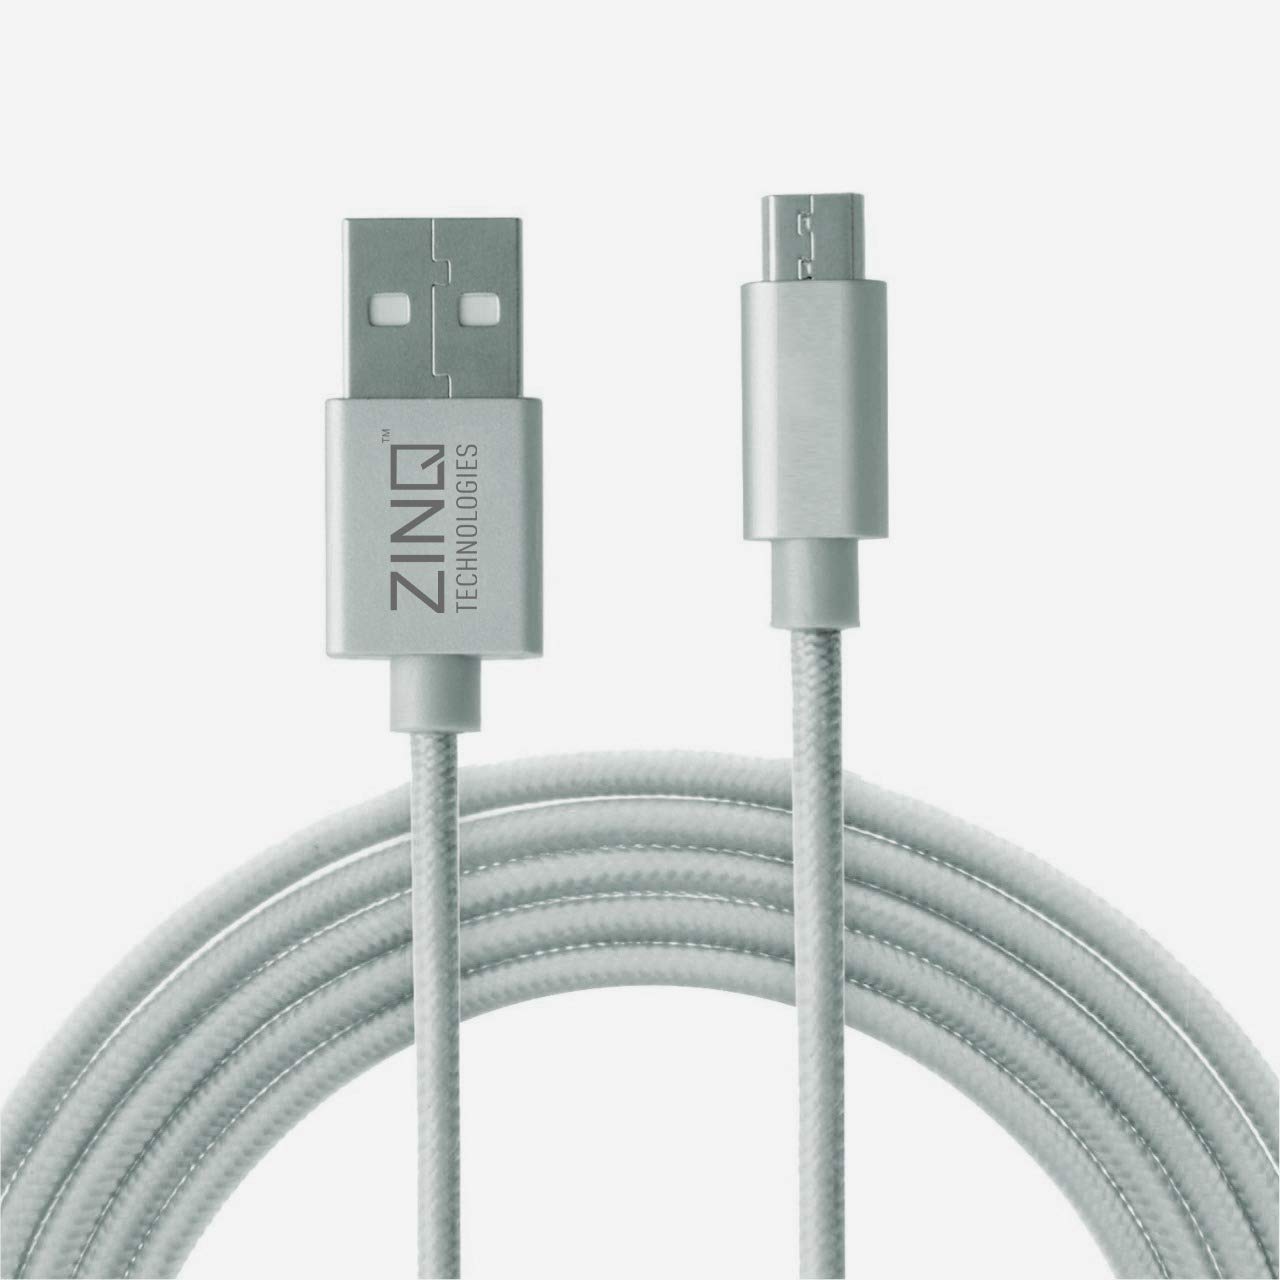 Open Box, Unused Zinq Technologies Nylon Braided Micro USB Cable Pack of 2